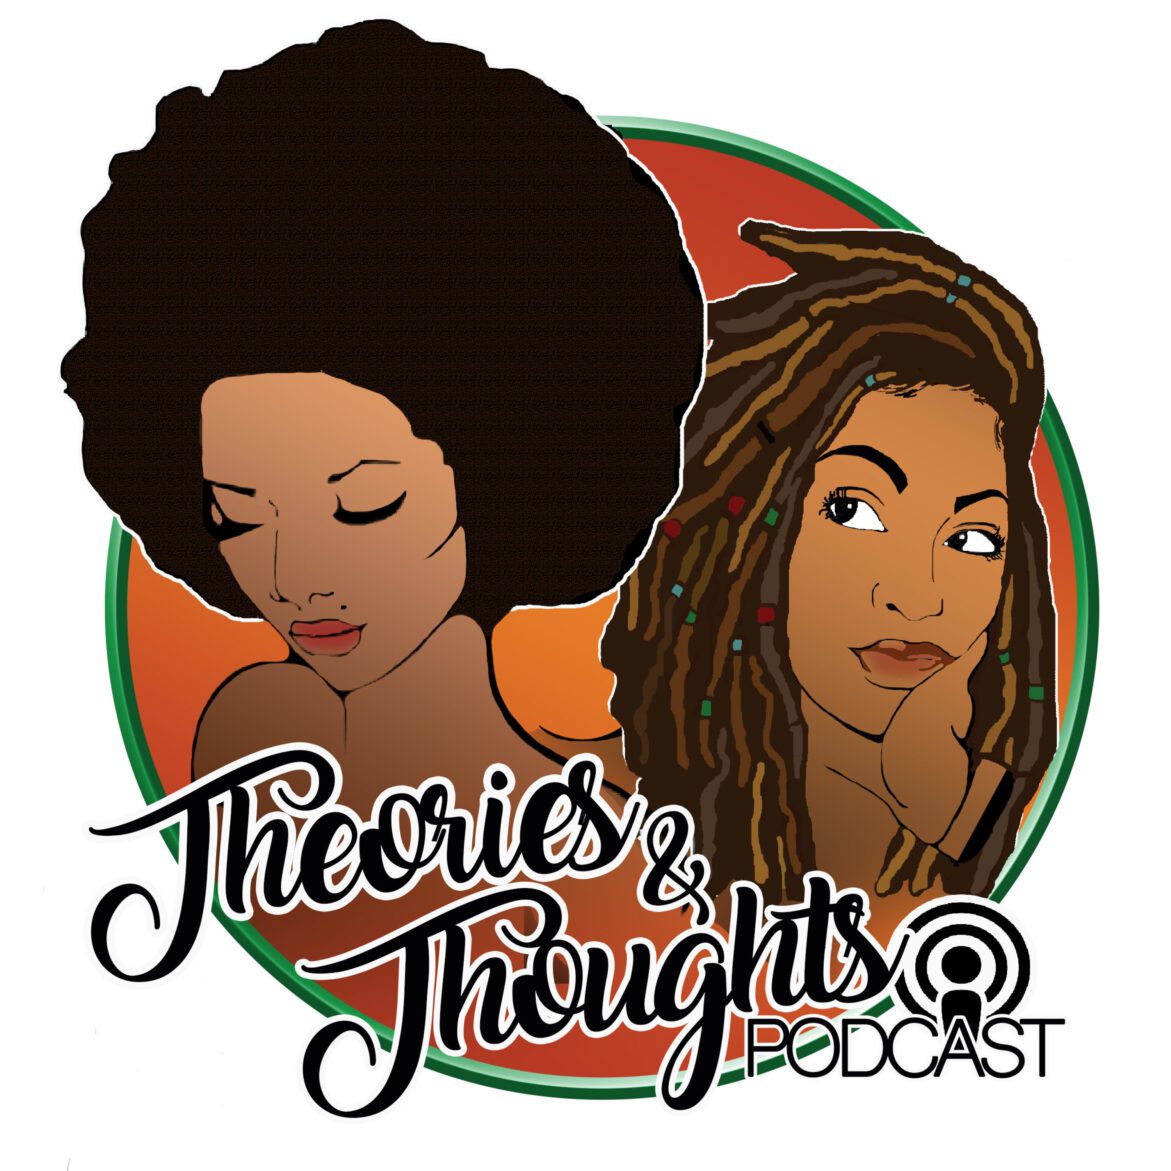 Black Podcasting - Theories & Thoughts: Ep. 53- What’s Up With This Election W/ Ernest Drones